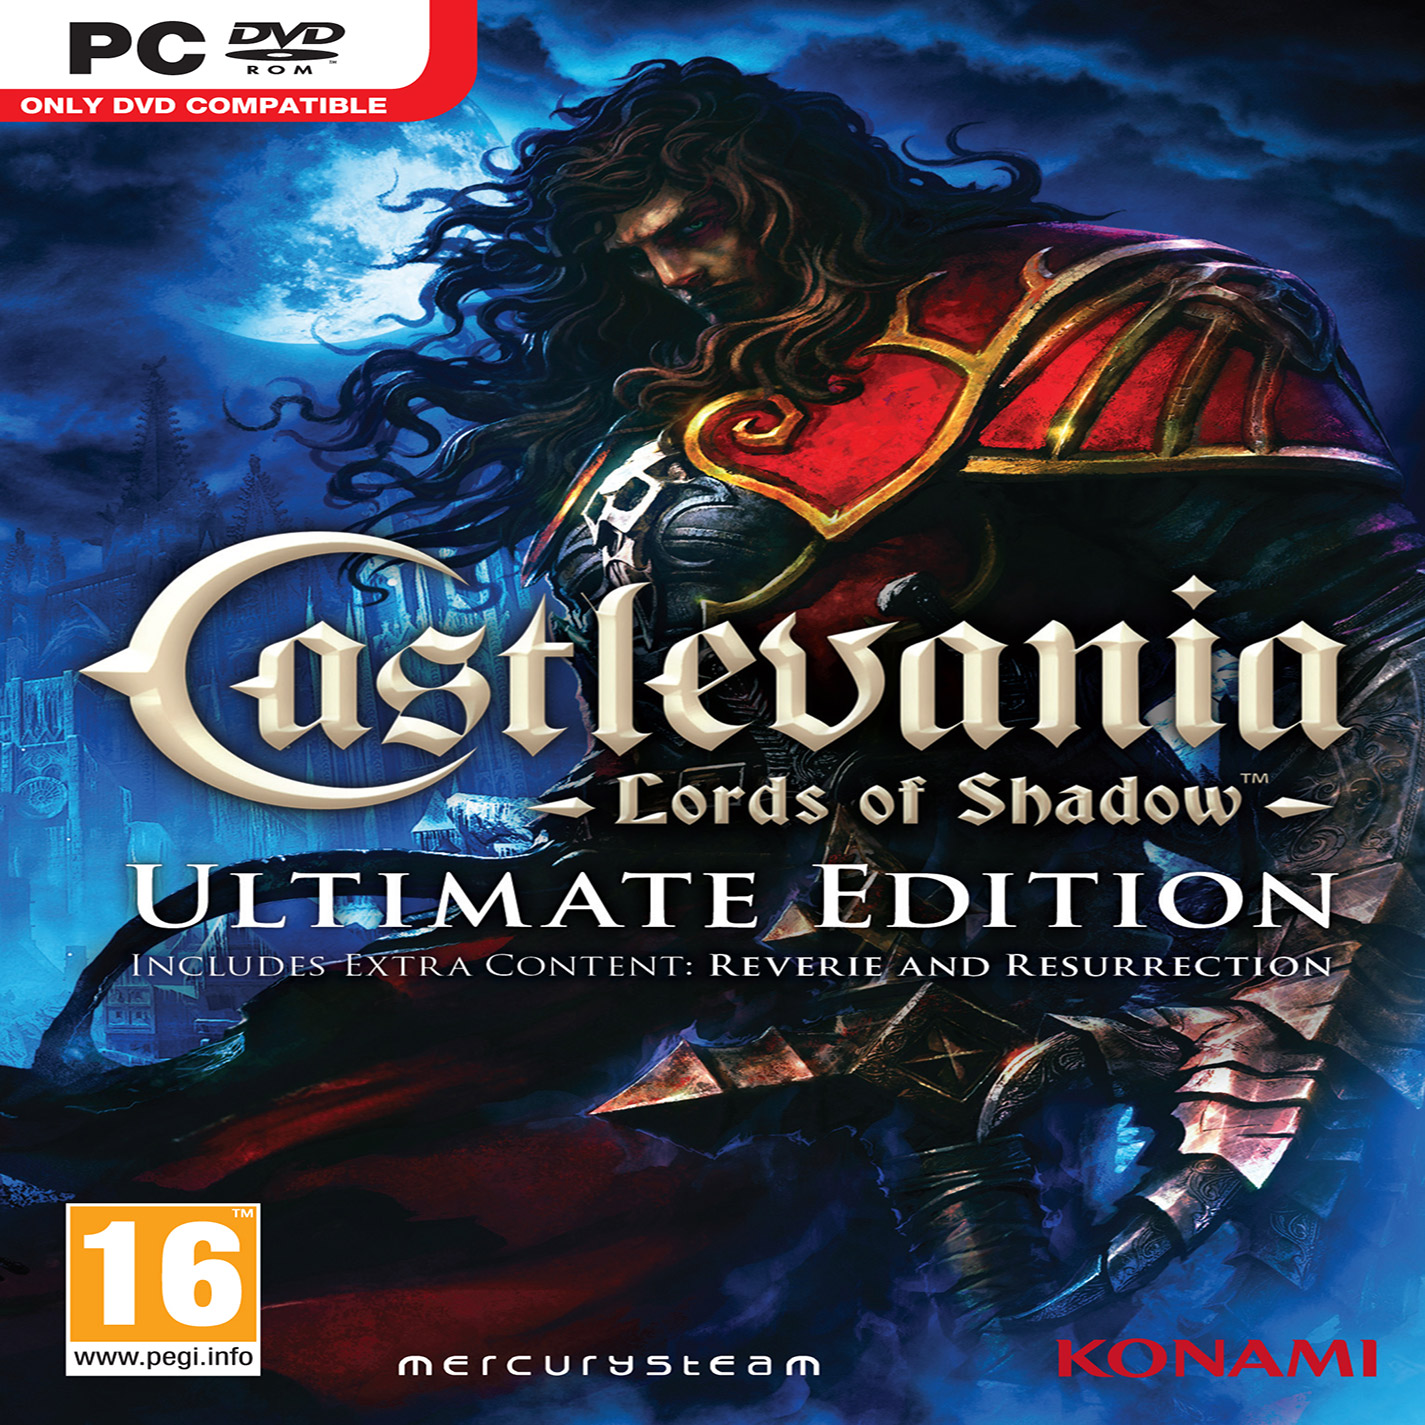 Castlevania: Lords of Shadow - Ultimate Edition - predn CD obal